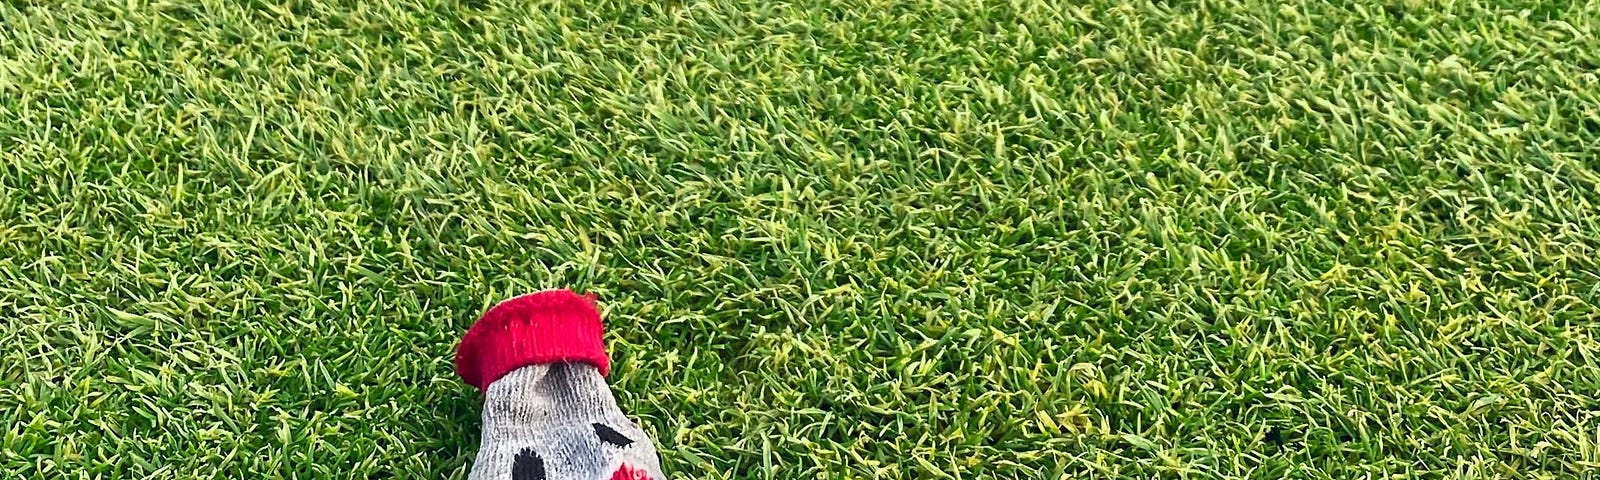 The missing sock— a lonely sock found on the grass | humour | pockett dessert nature photography